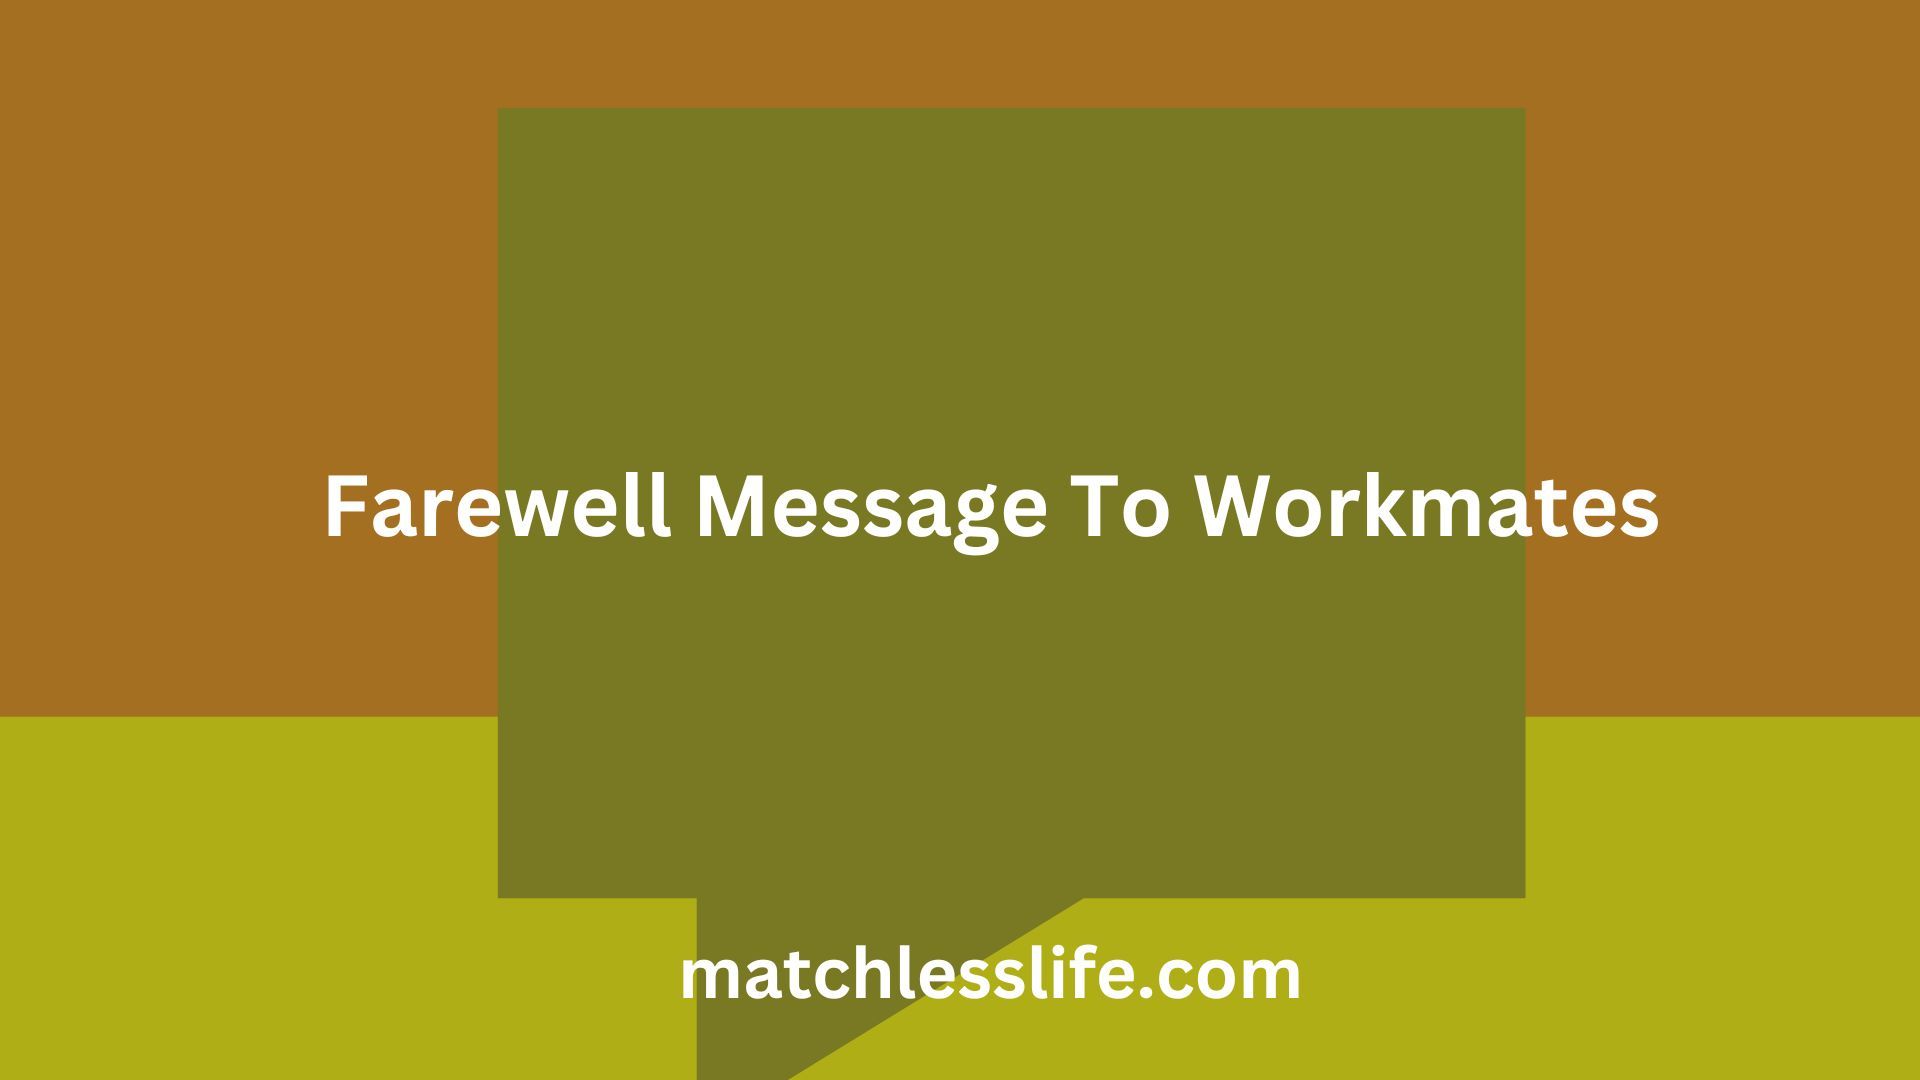 Farewell Message To Workmates